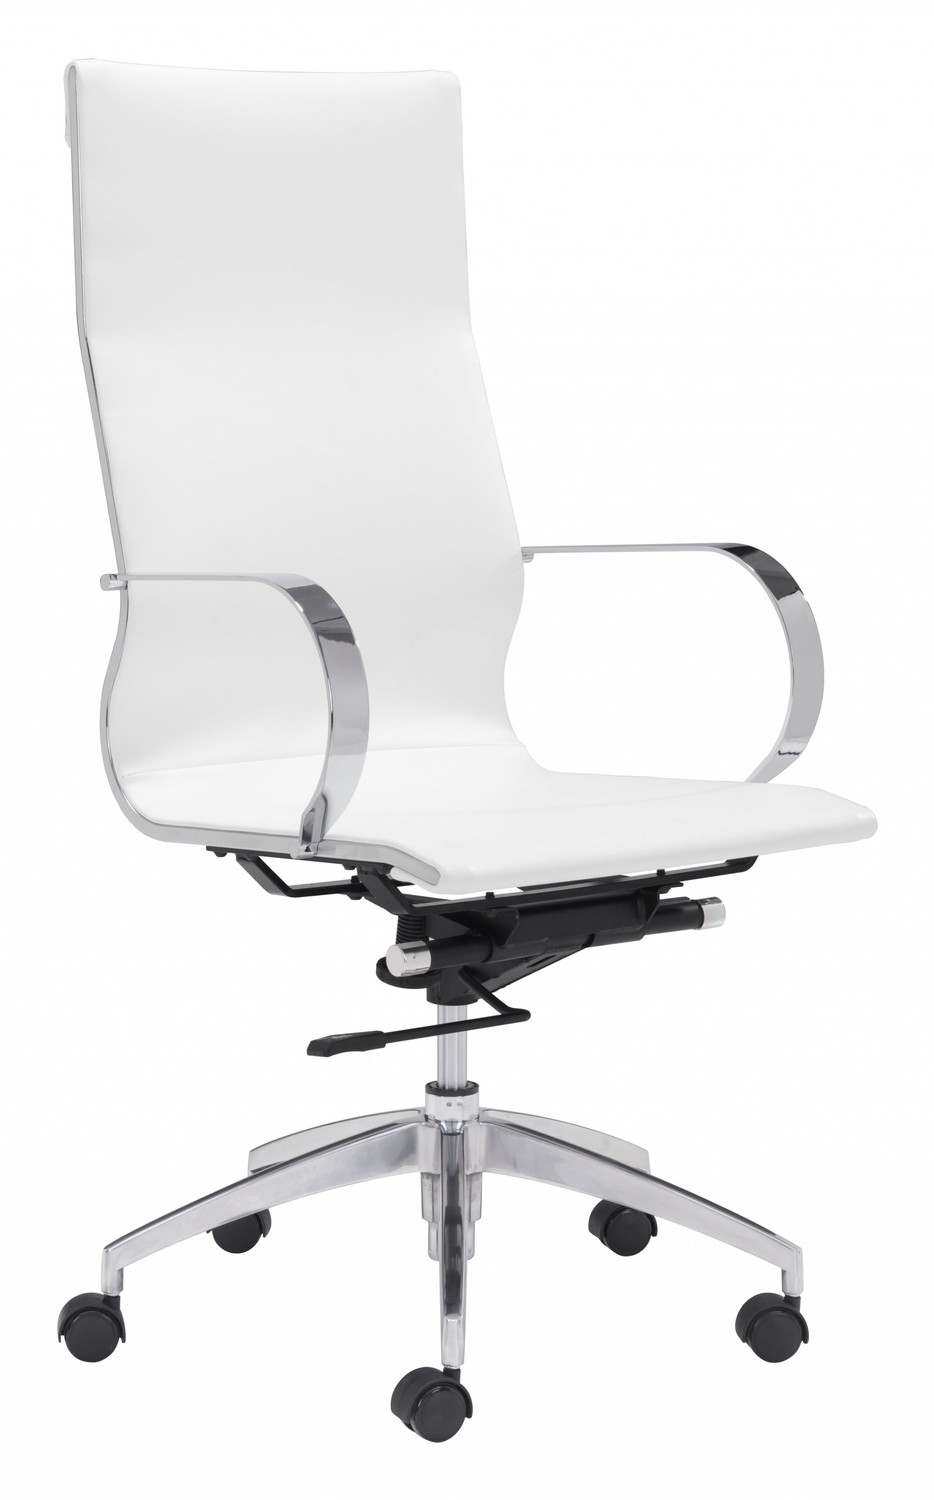 White Ergonomic Conference Room High Back Rolling Office Chair